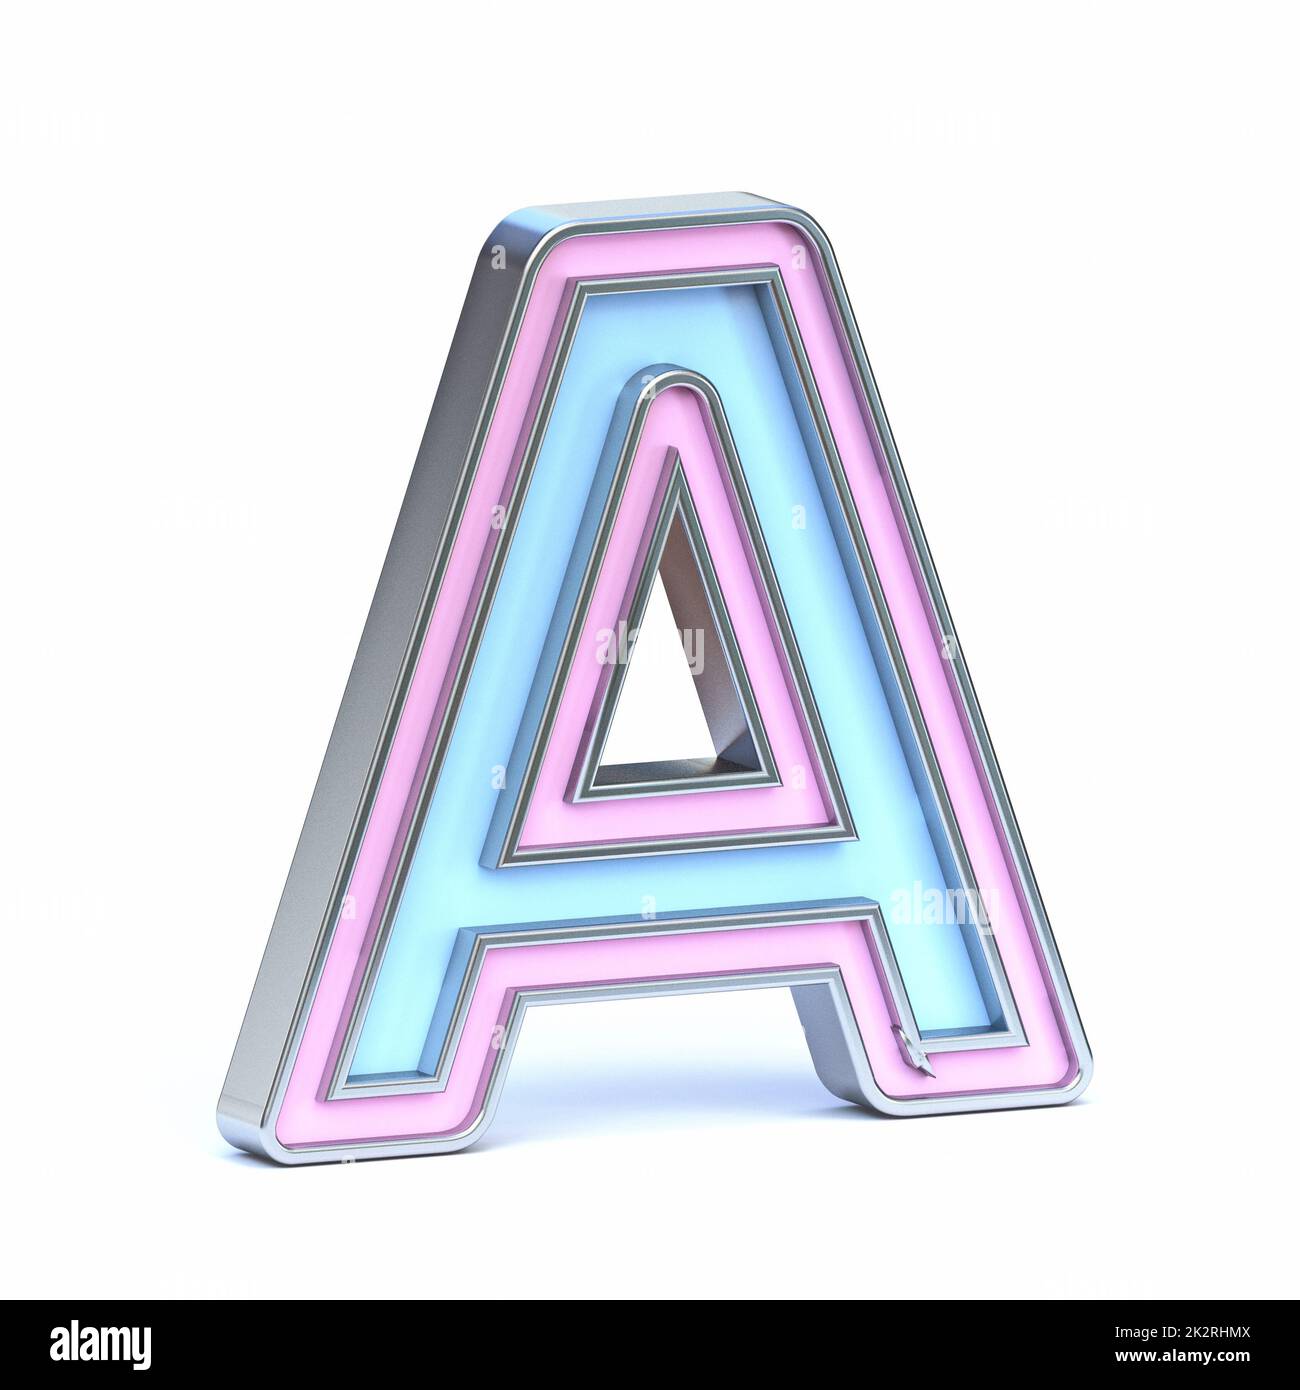 Blue and pink metal font Letter A 3D Stock Photo